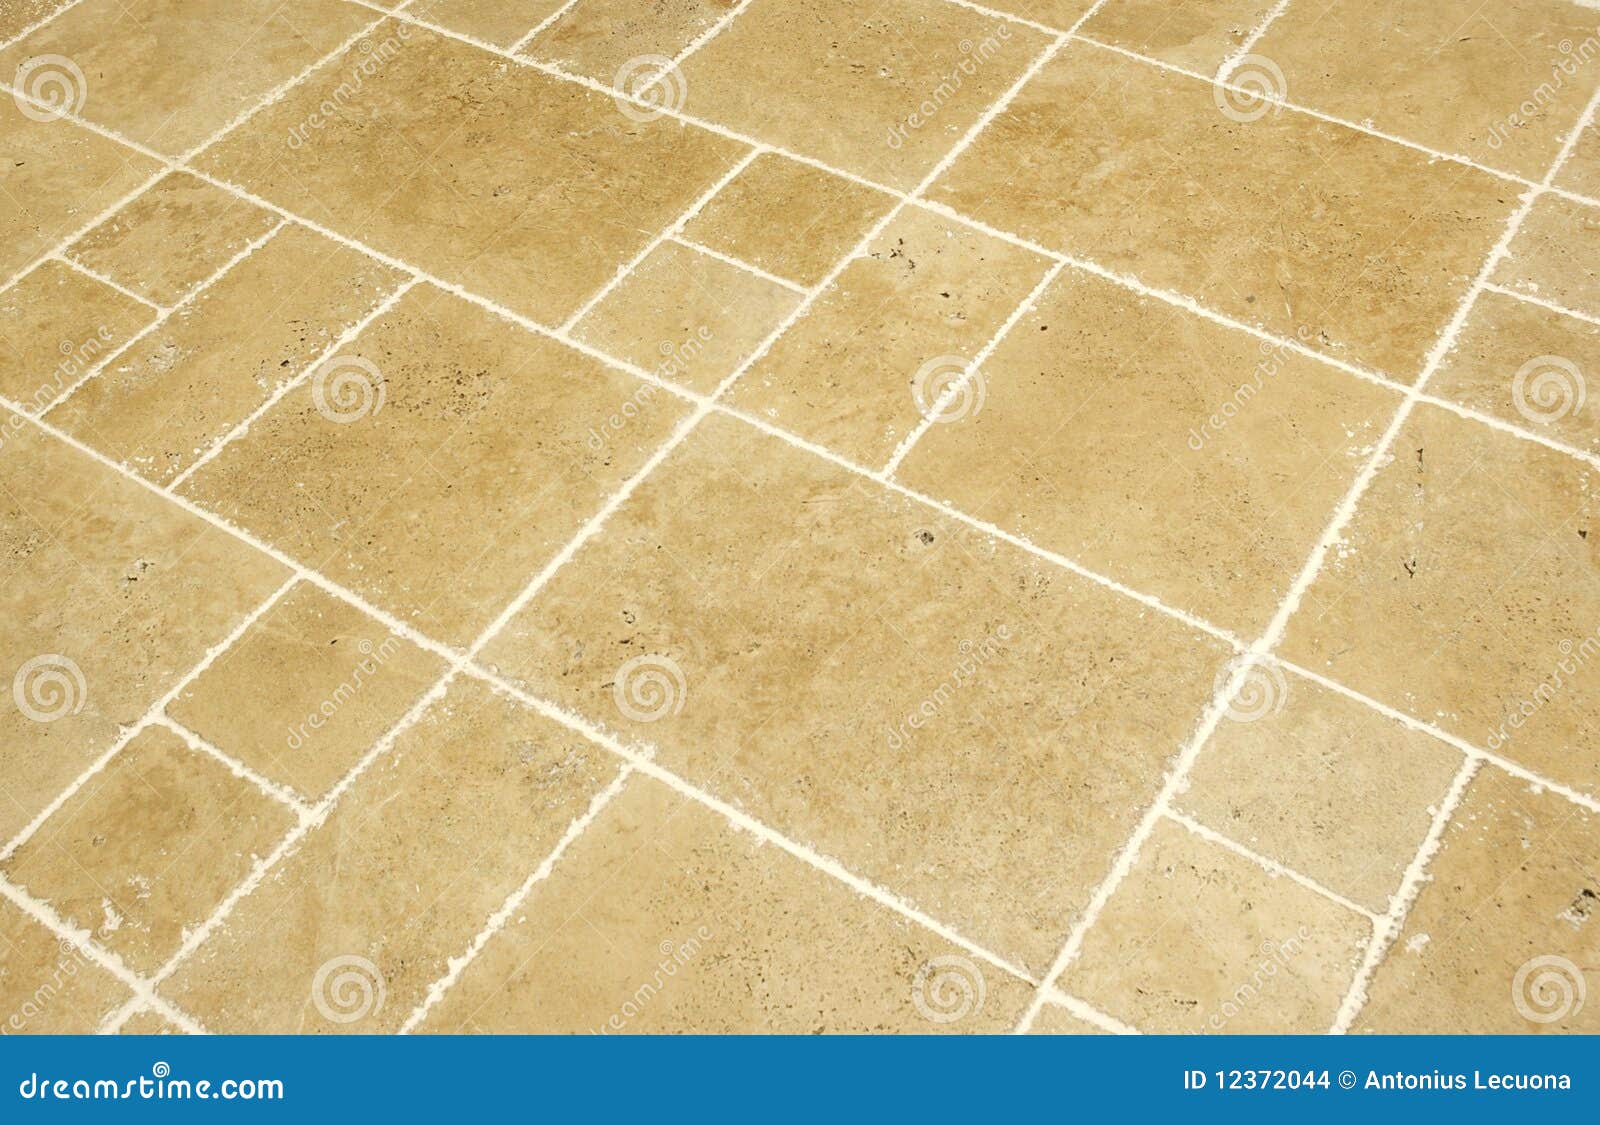 high quality unfilled travertine